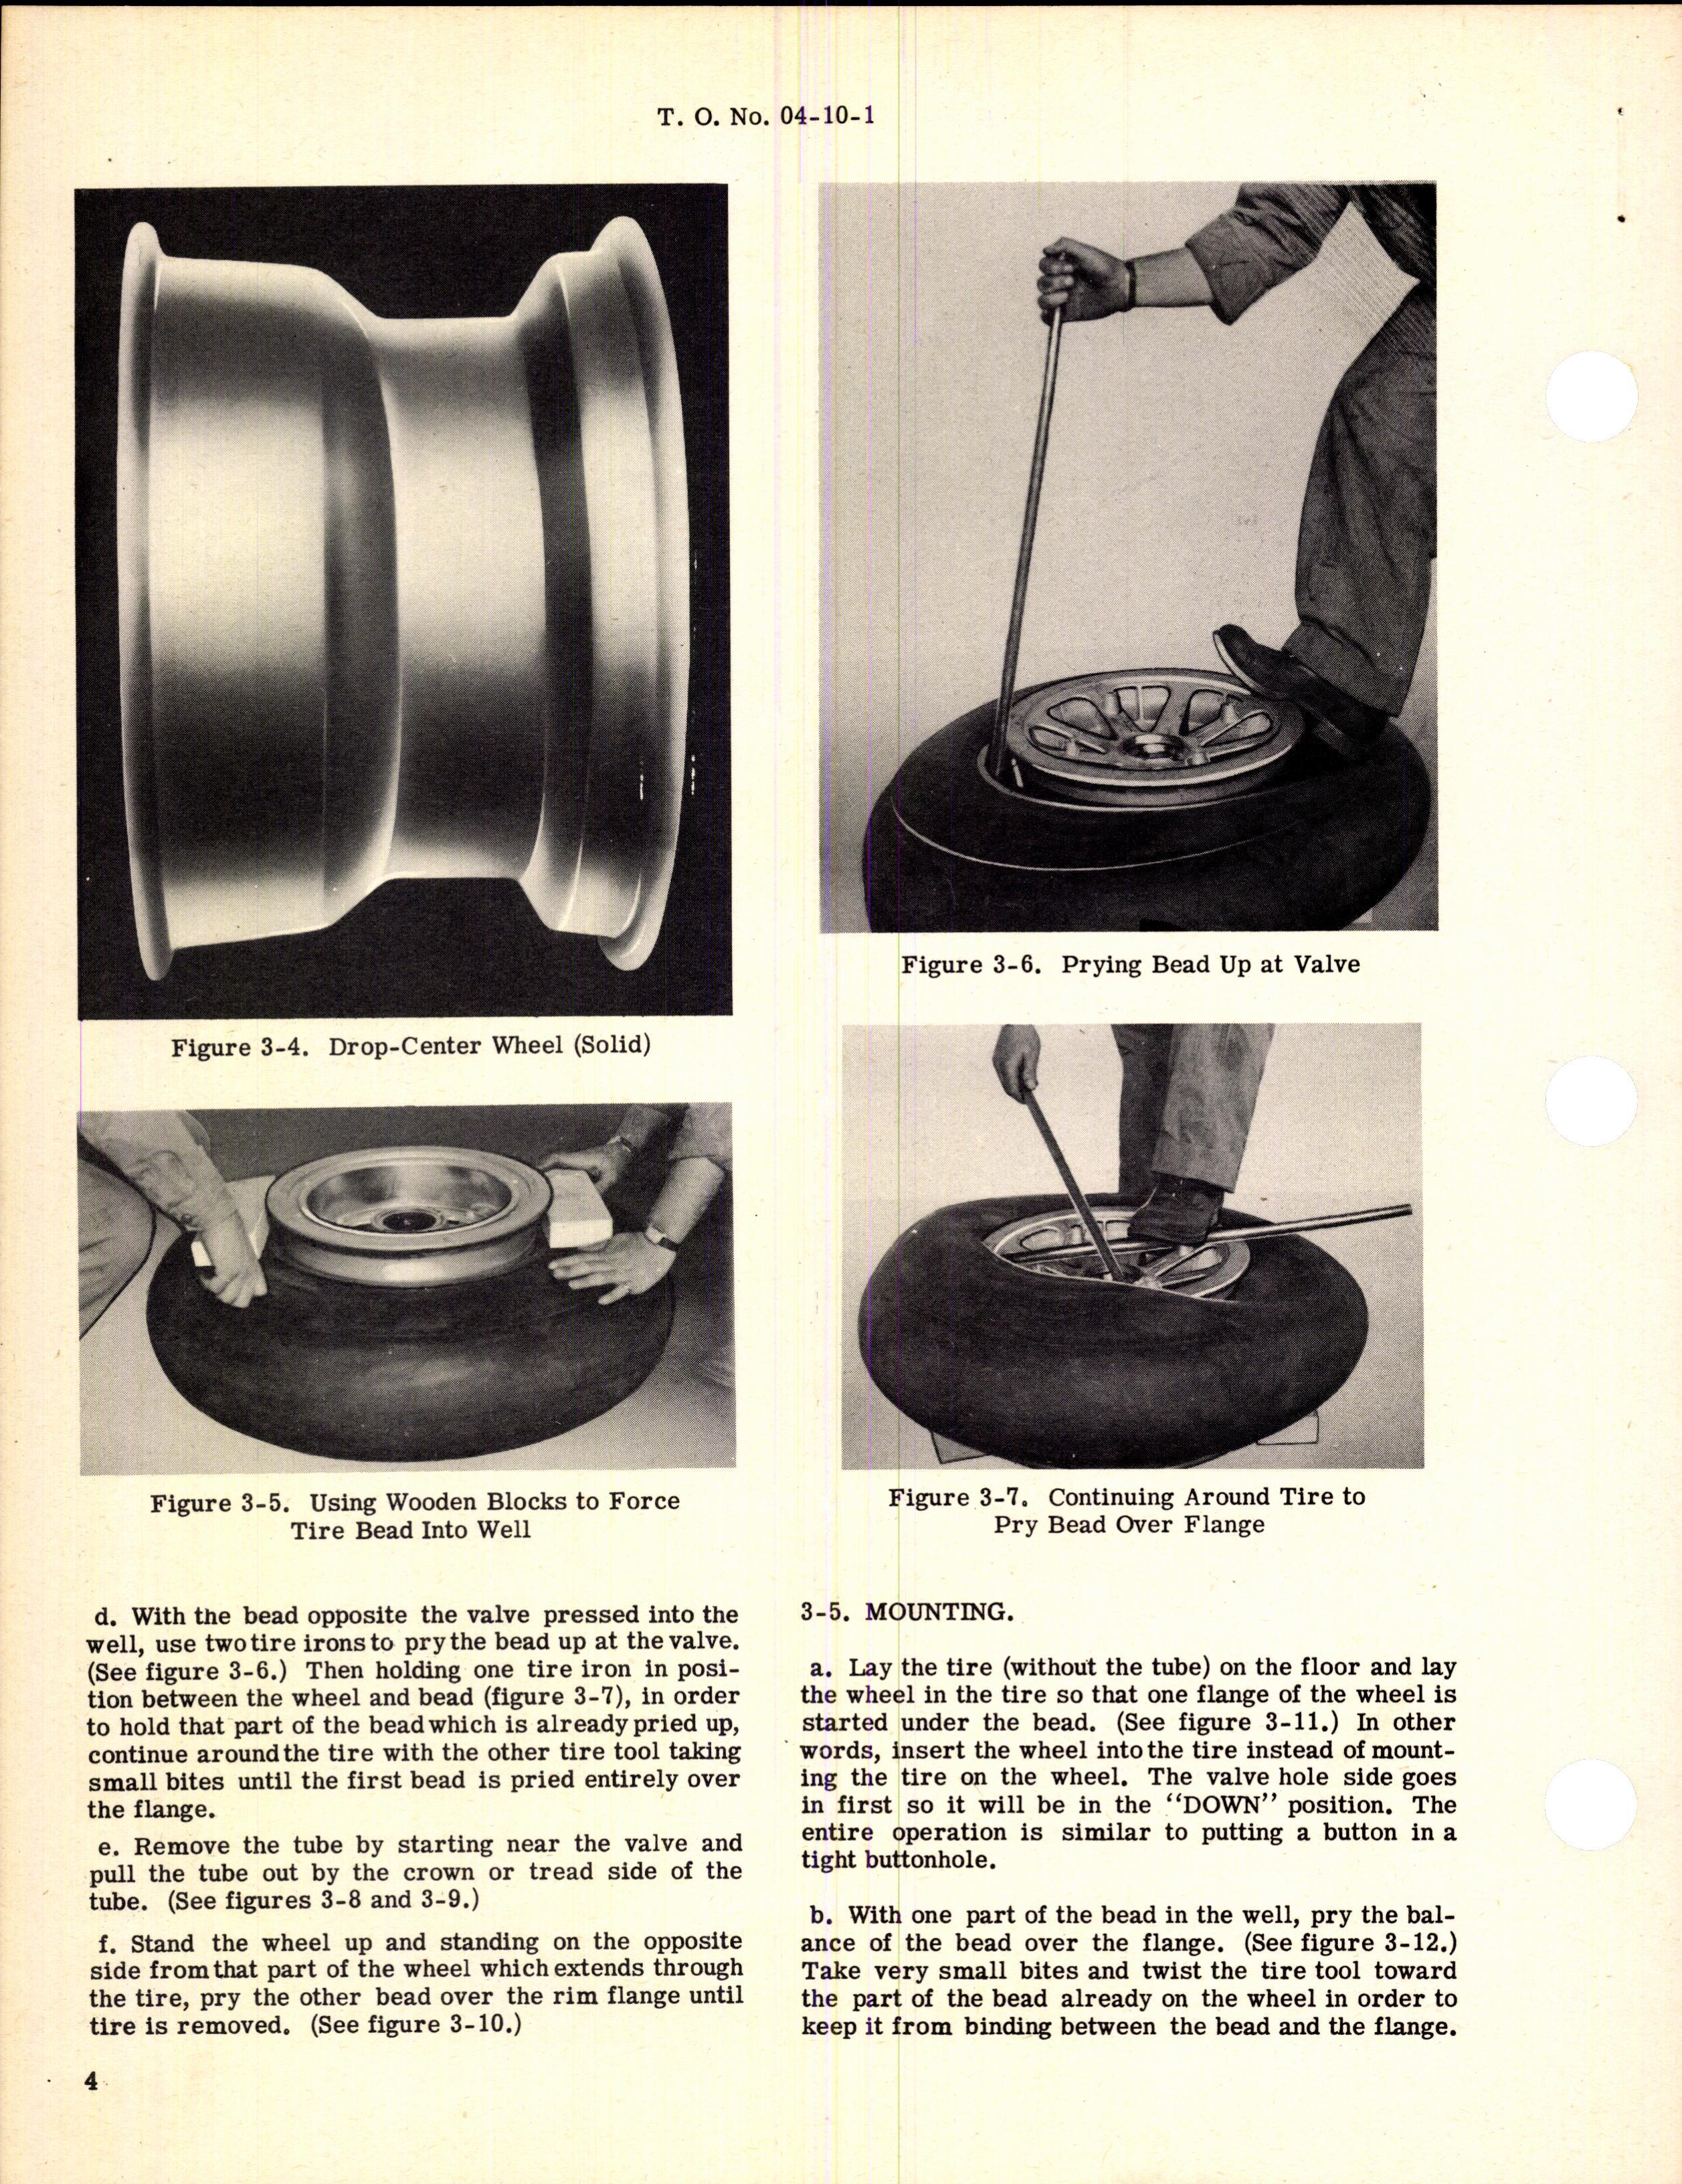 Sample page 6 from AirCorps Library document: Dismounting, Mounting, and Inflation of Aircraft Tires and Tubes